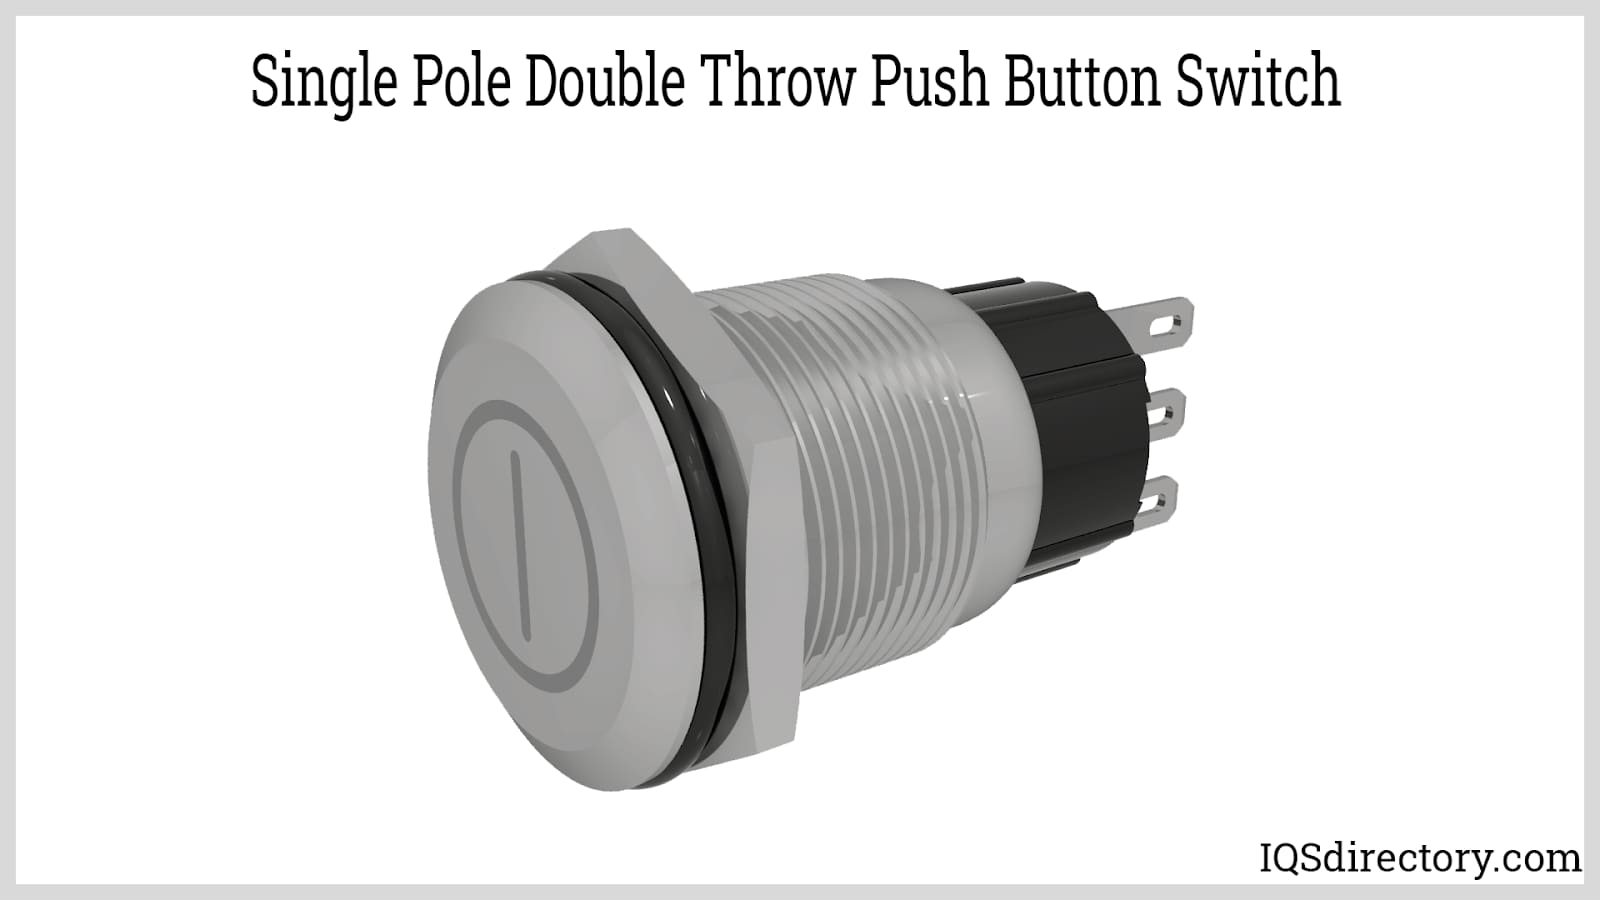 Single Pole Double Throw Push Button Switch